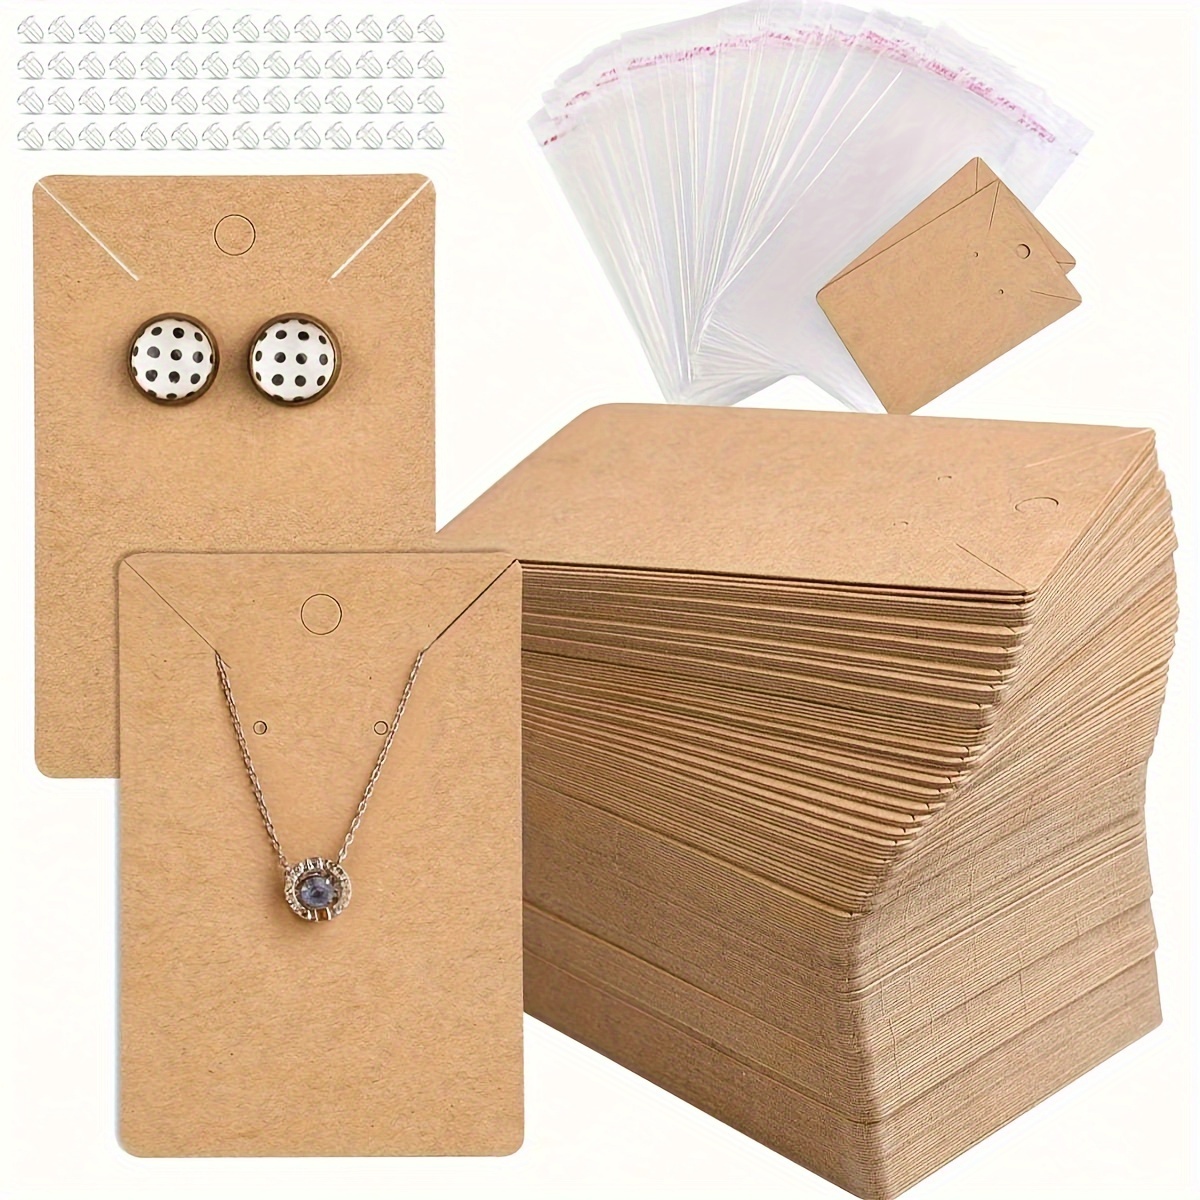 

200-piece Earring Display Cards Set, Includes 50 Kraft Paper Jewelry Holders, 50 Self-sealing Bags, And 100 Earring Backs For Earrings Necklace Showcase